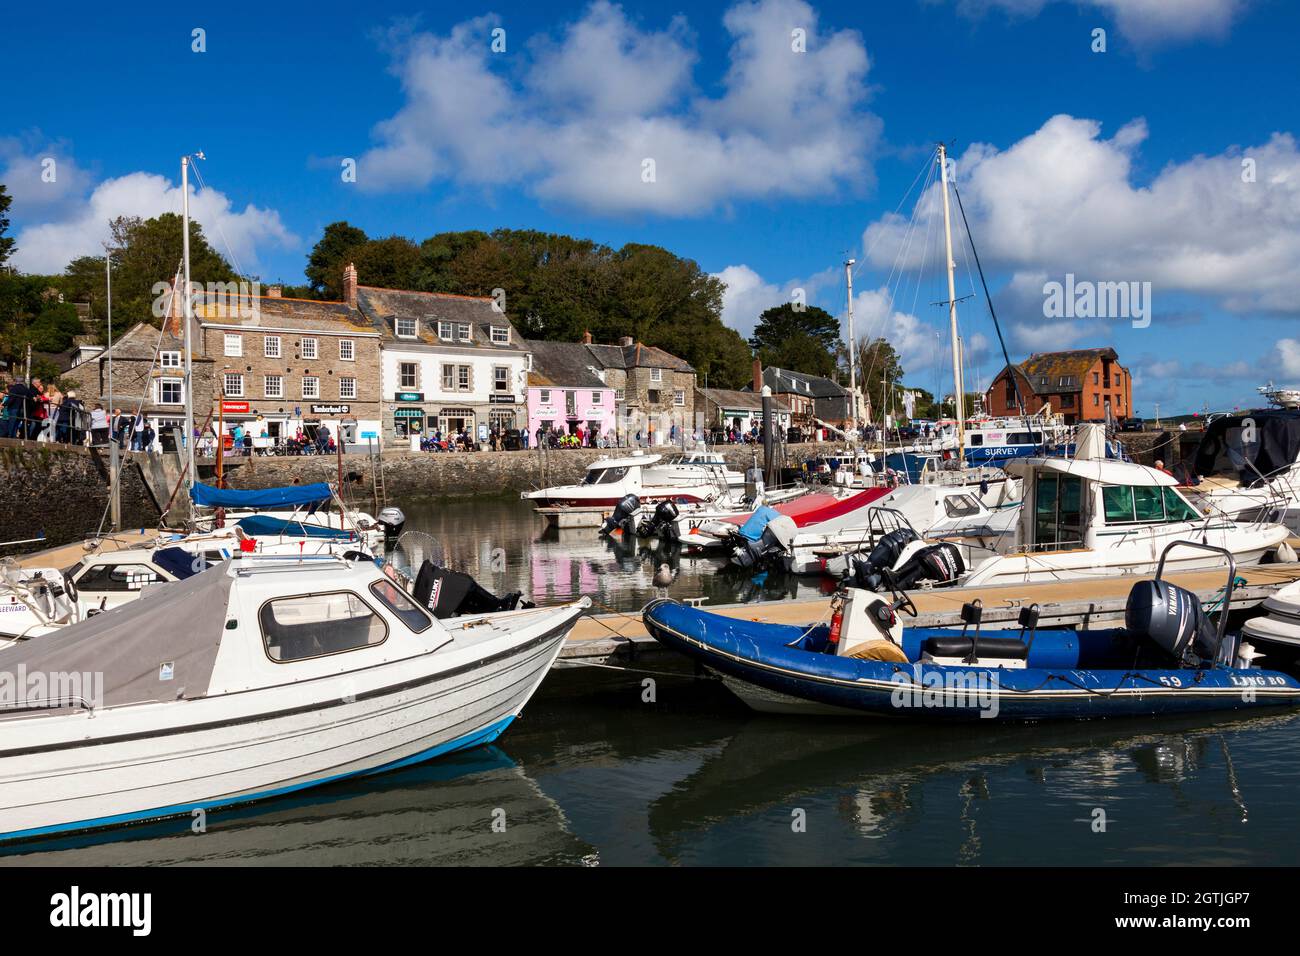 The harbour in Padstow, Cornwall, England, U.K. Stock Photo